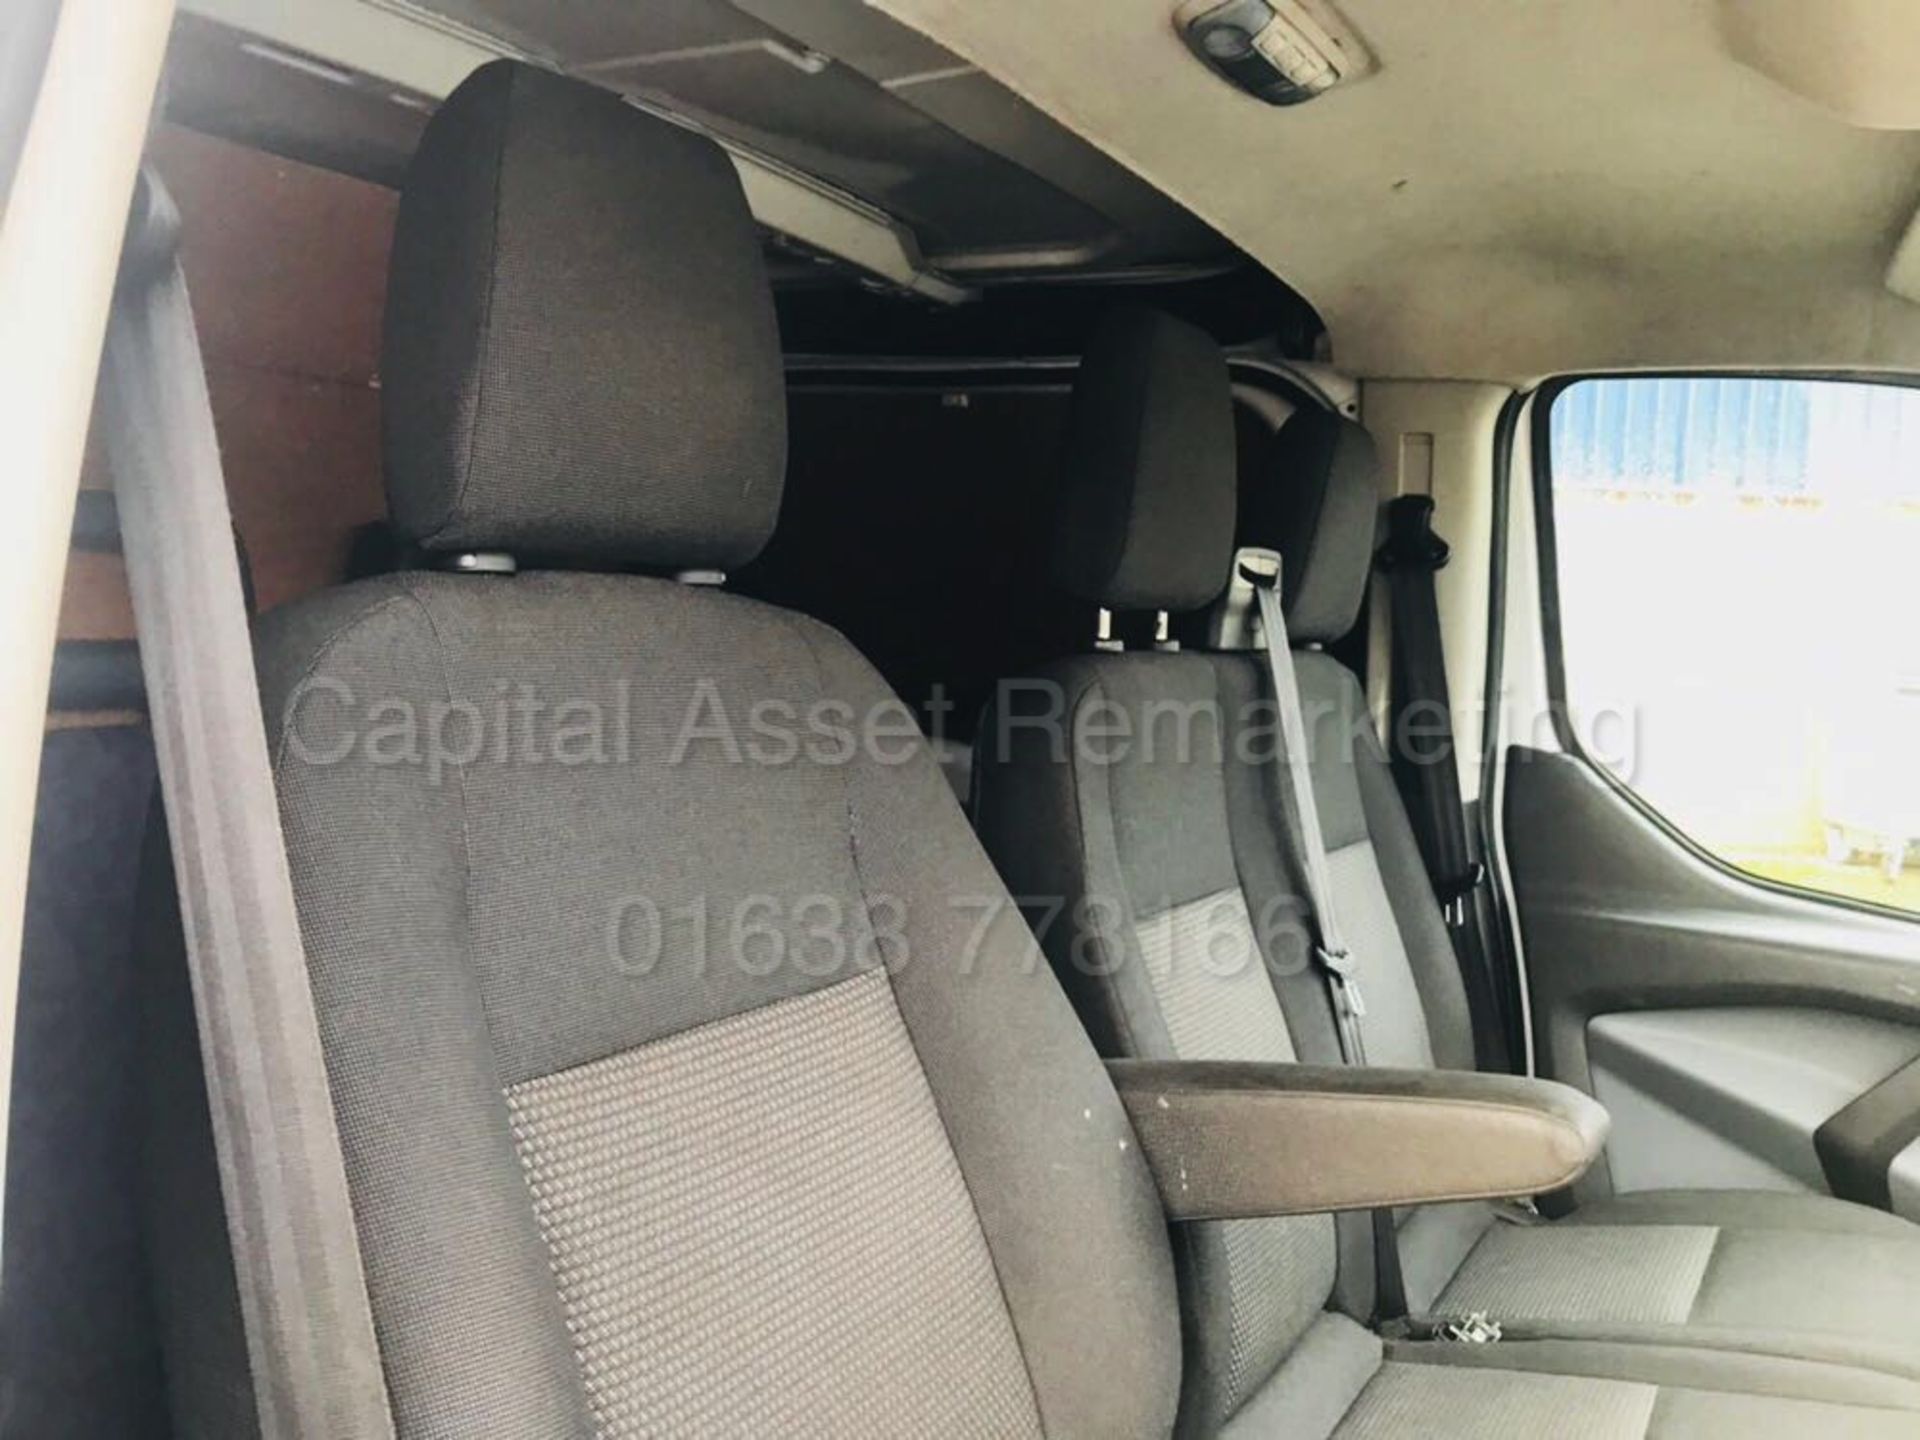 (On Sale) FORD TRANSIT CUSTOM 'LIMITED SPEC' (2013 - NEW MODEL) '2.2 TDCI - 6 SPEED' *A/C* (NO VAT) - Image 17 of 32